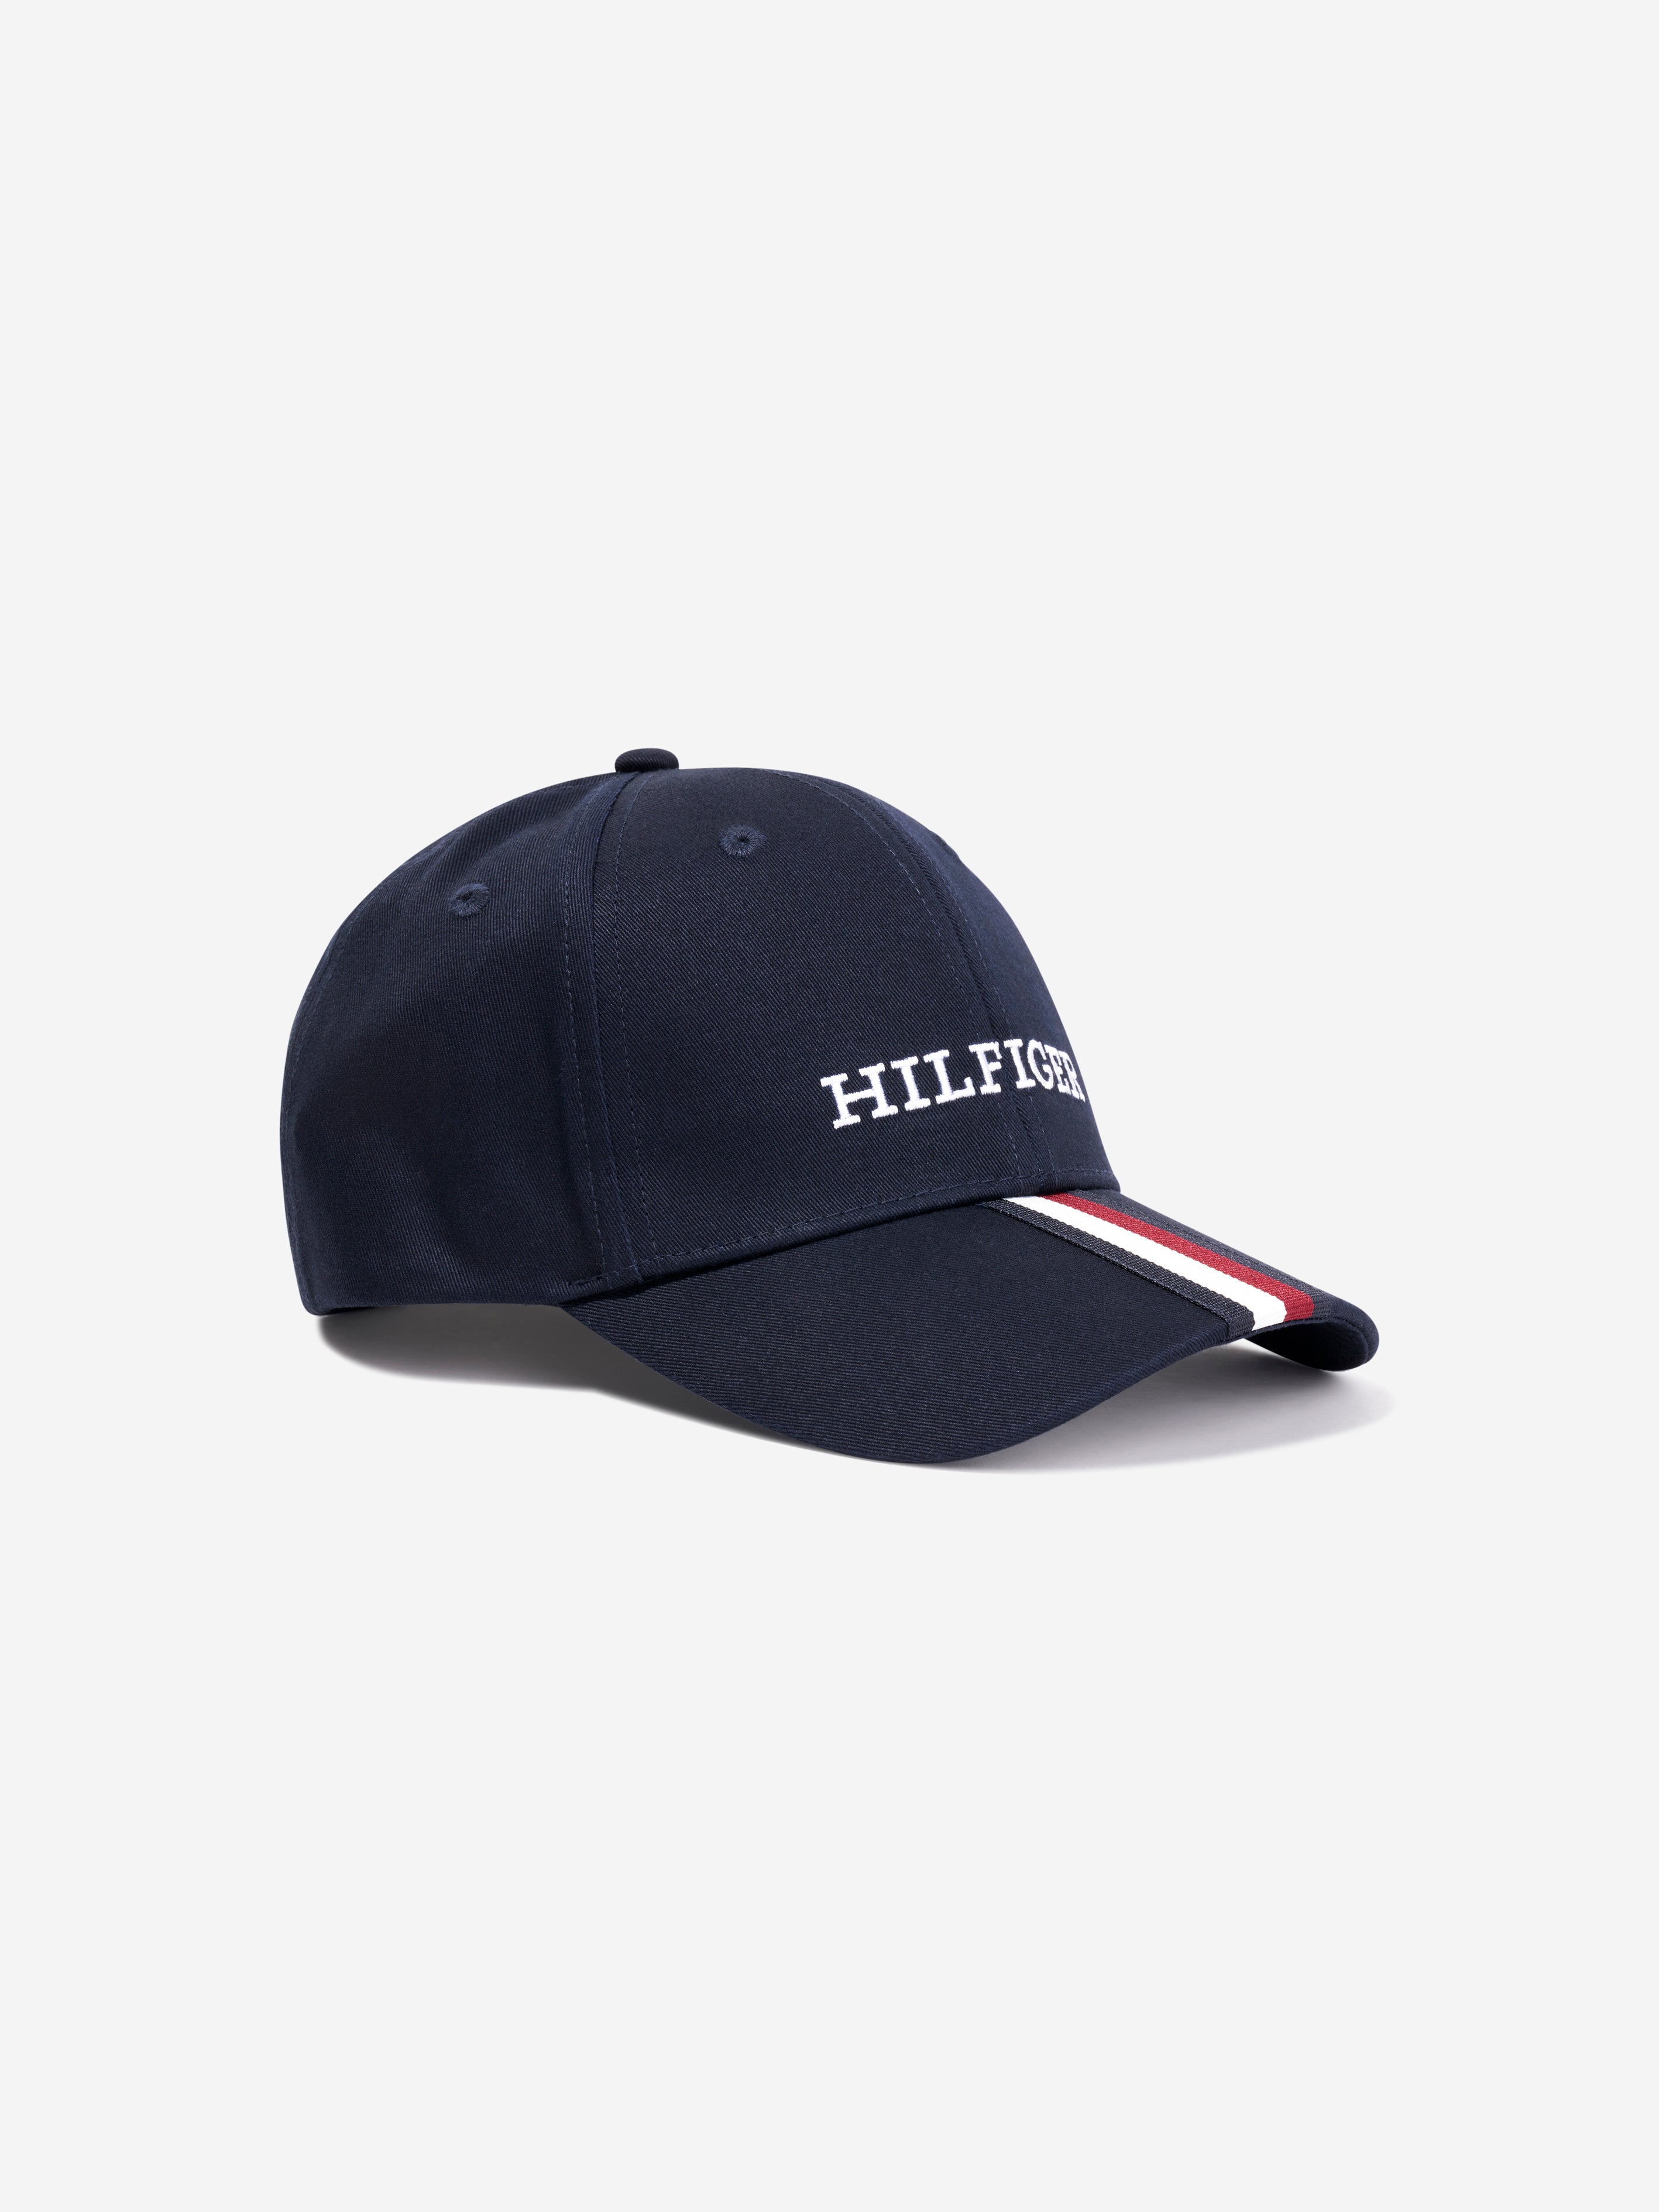 in Cap Clothing Childsplay | Navy Kids Corporate Hilfiger Tommy Hilfiger